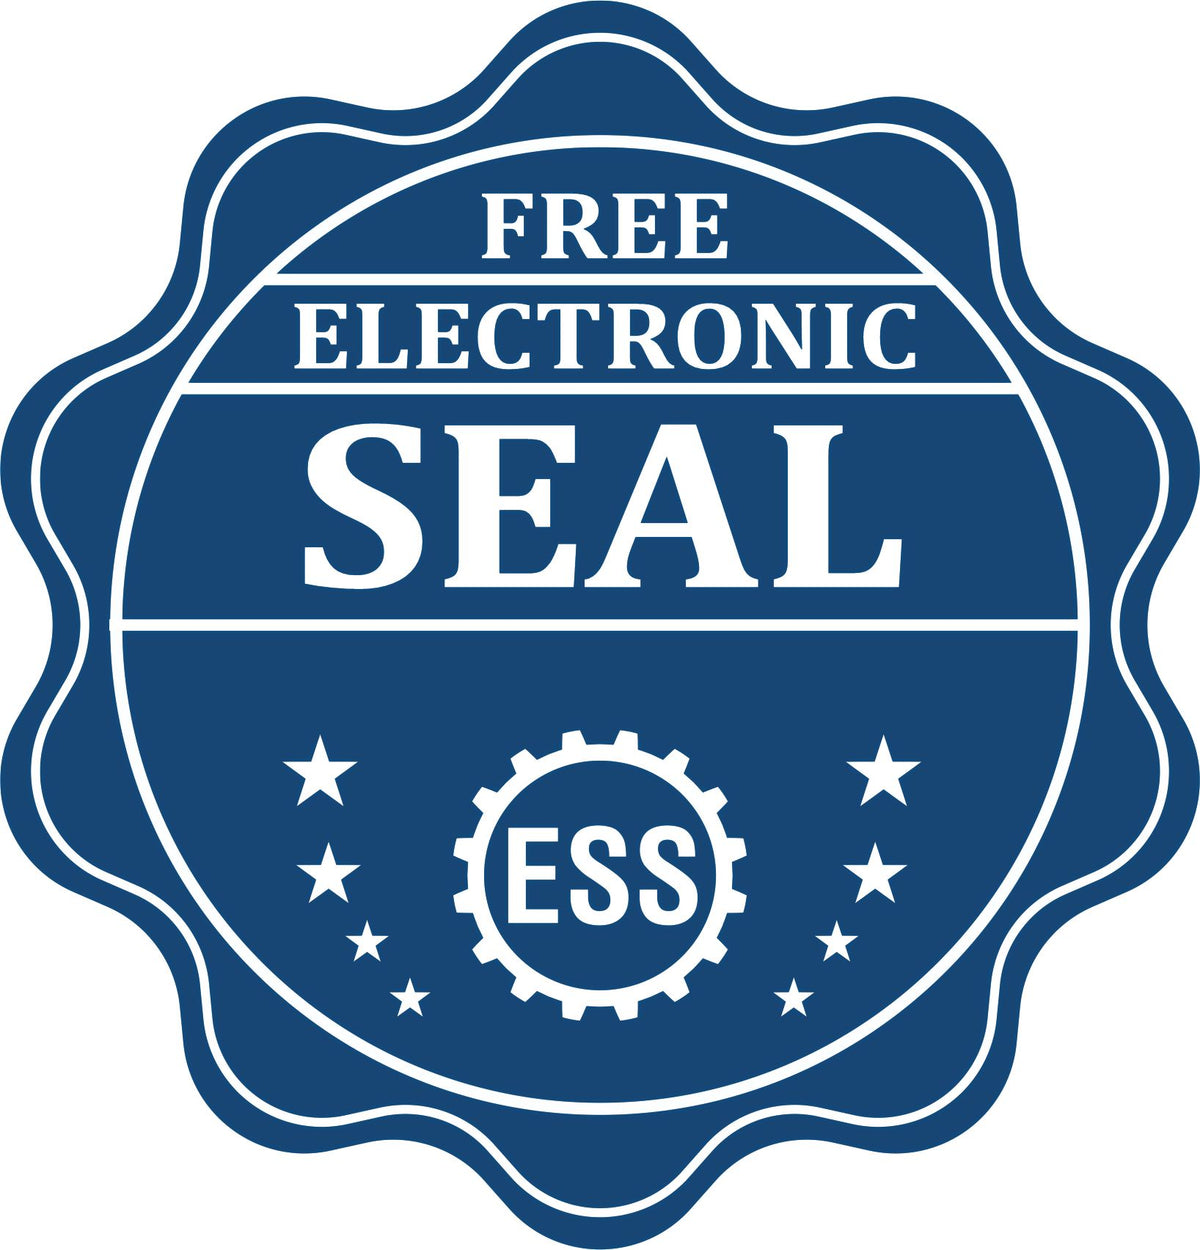 A badge showing a free electronic seal for the Slim Pre-Inked New Hampshire Landscape Architect Seal Stamp with stars and the ESS gear on the emblem.